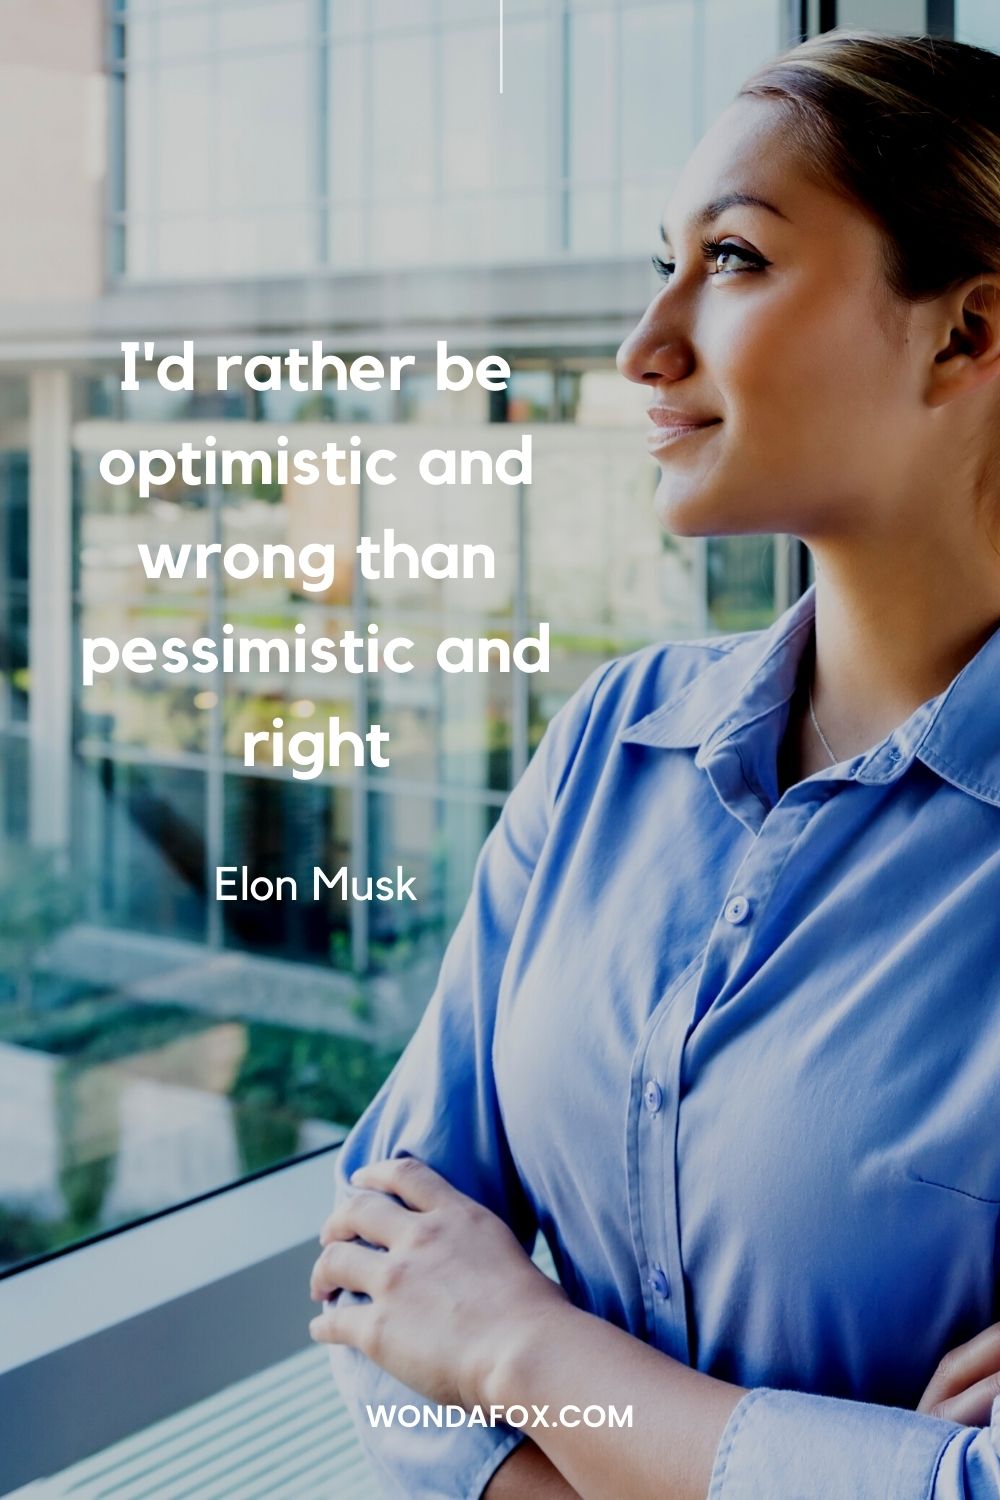 I'd rather be optimistic and wrong than pessimistic and right